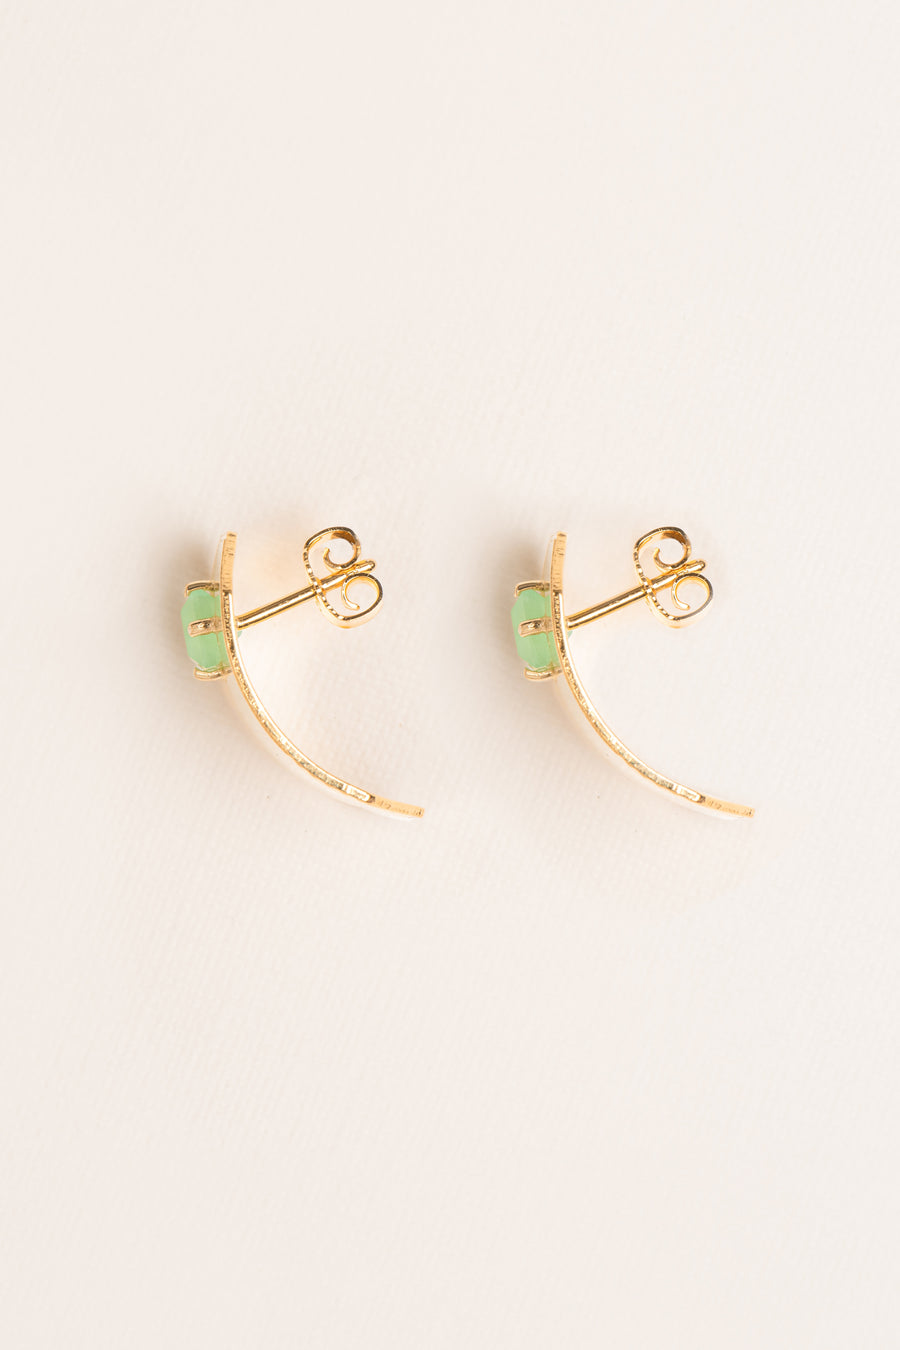 Wouters & Hendrix - Curved ID Earrings with Chrysoprase in Gold